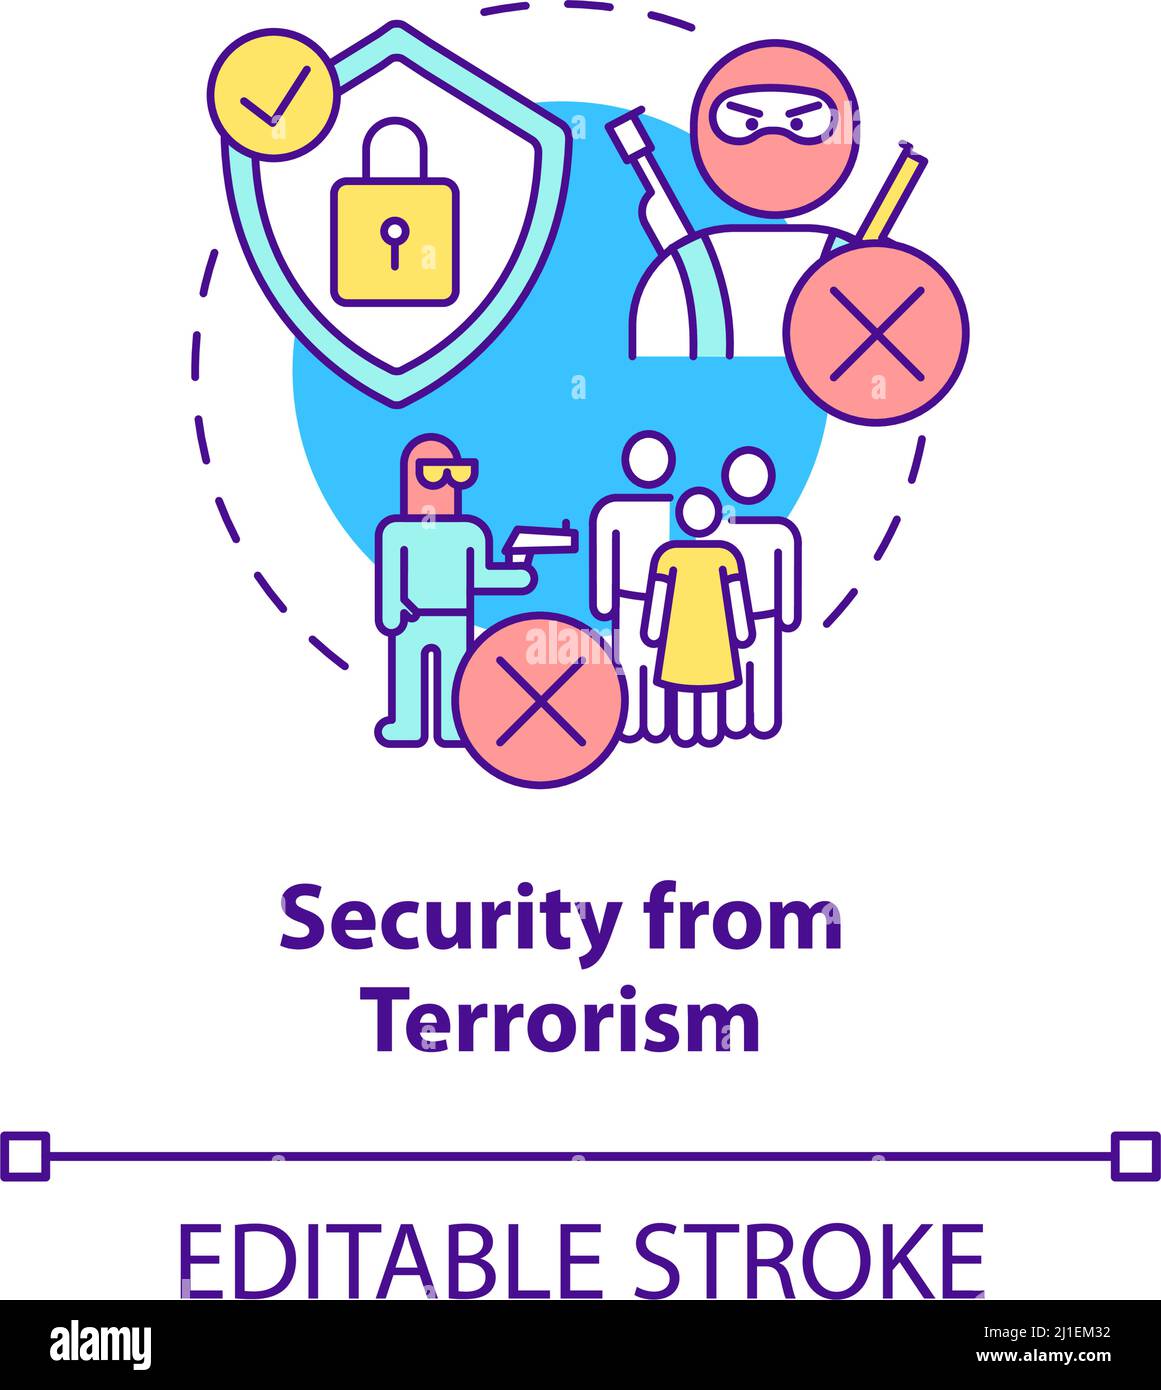 Security from terrorism concept icon Stock Vector